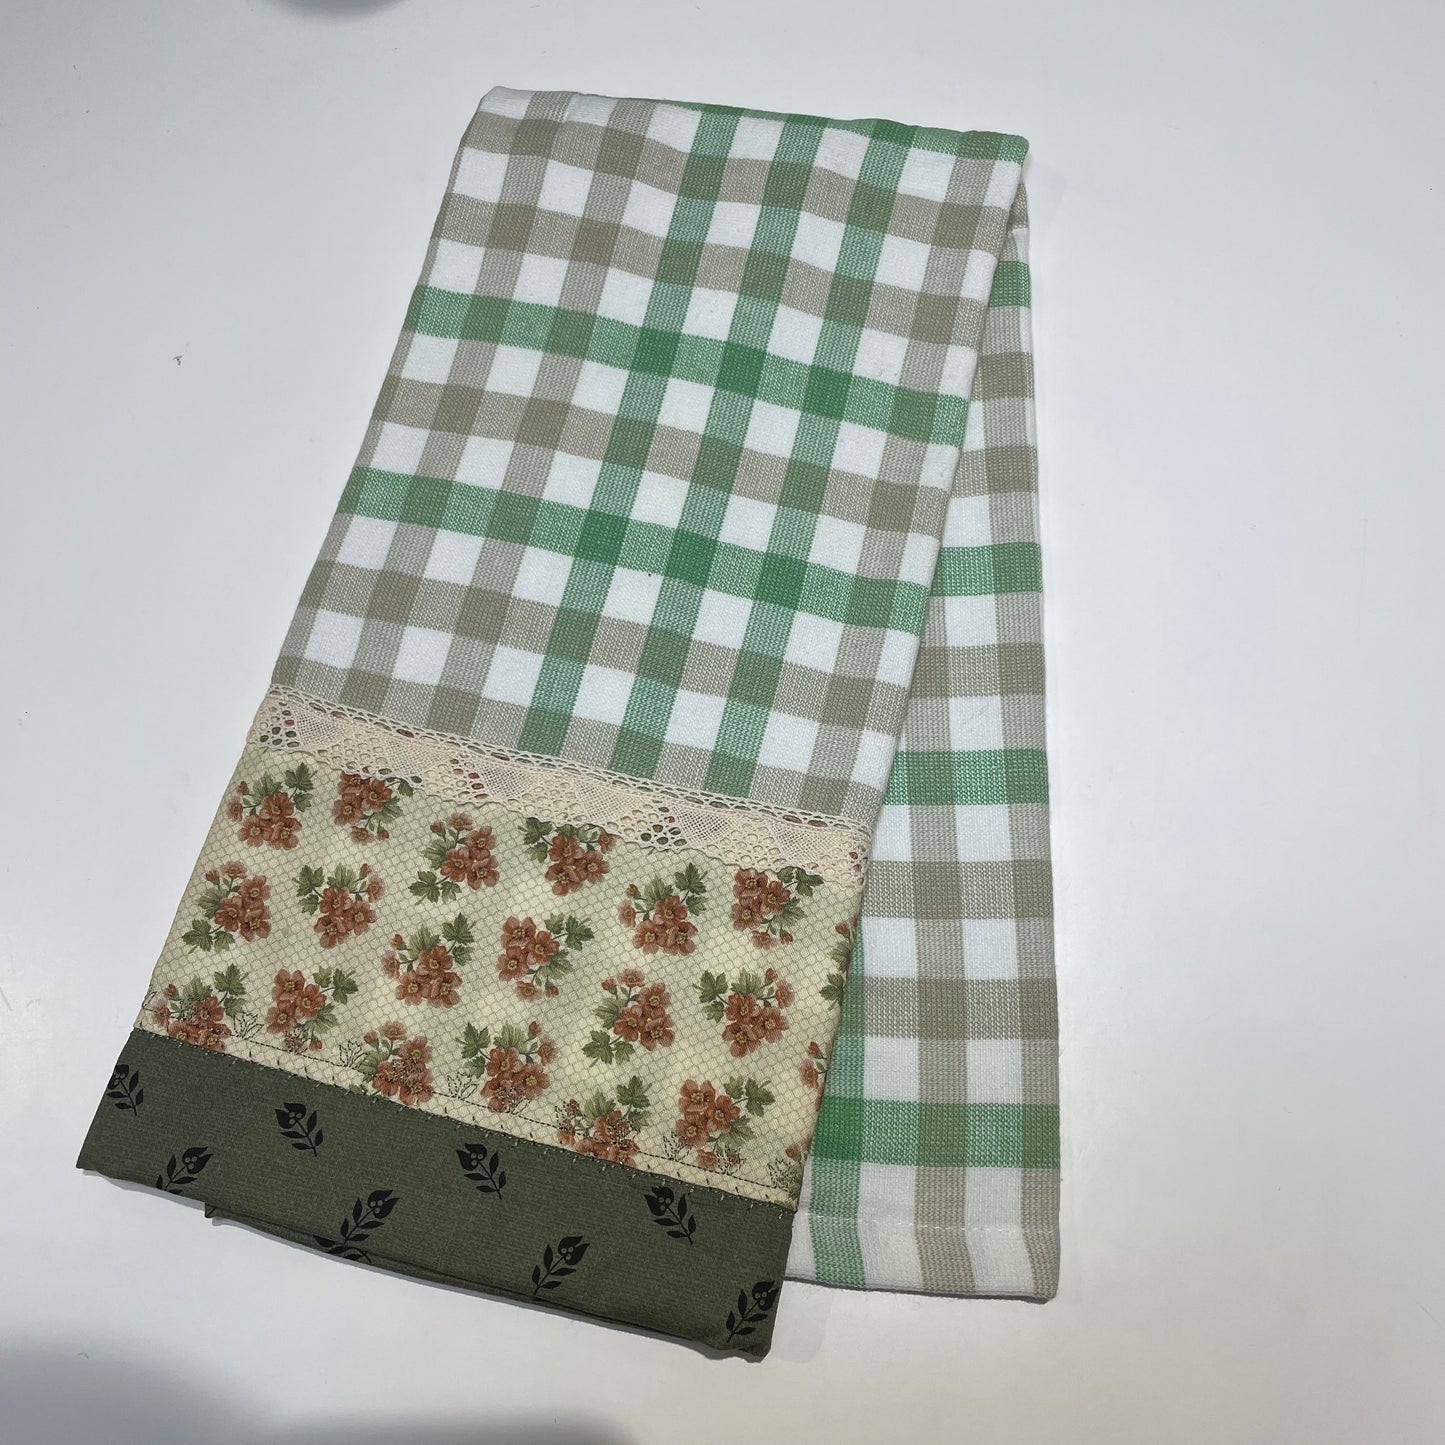 Farmhouse Dish Towel with green and white check towelins and orange and green cotton fabric decorations. Featuring embroidery stitching and beige cotton lace trim. Handcrafted in Canada by Home Stitchery Decor. Purchased coordinating Farmhouse Decor or follow along with tutorials on the Home Stitchery Decor YouTube Channel. 